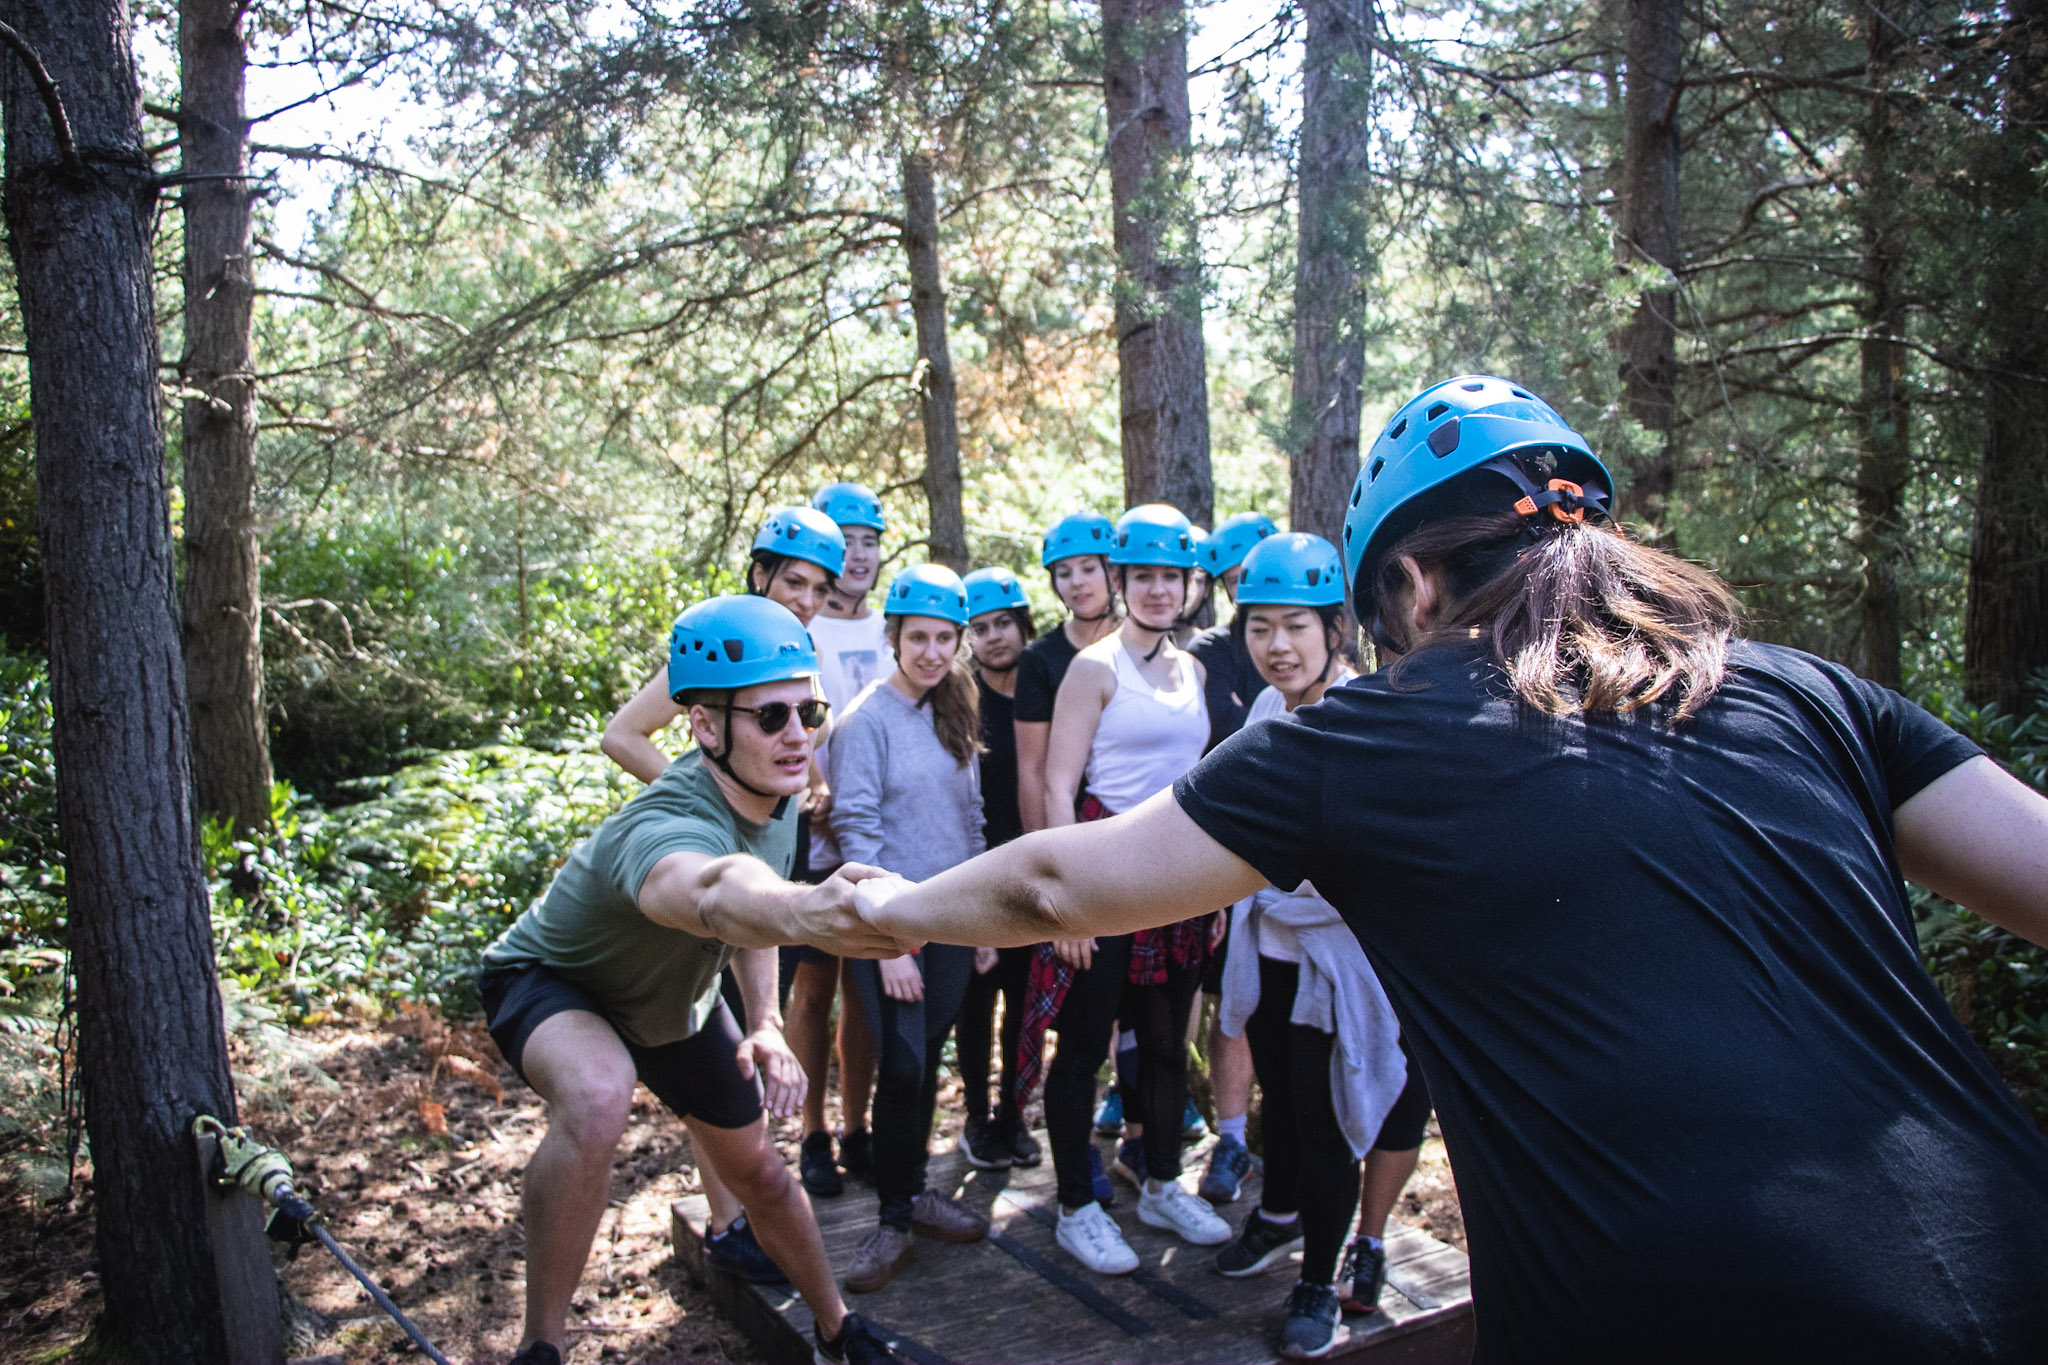 A team taking part in a low ropes activity